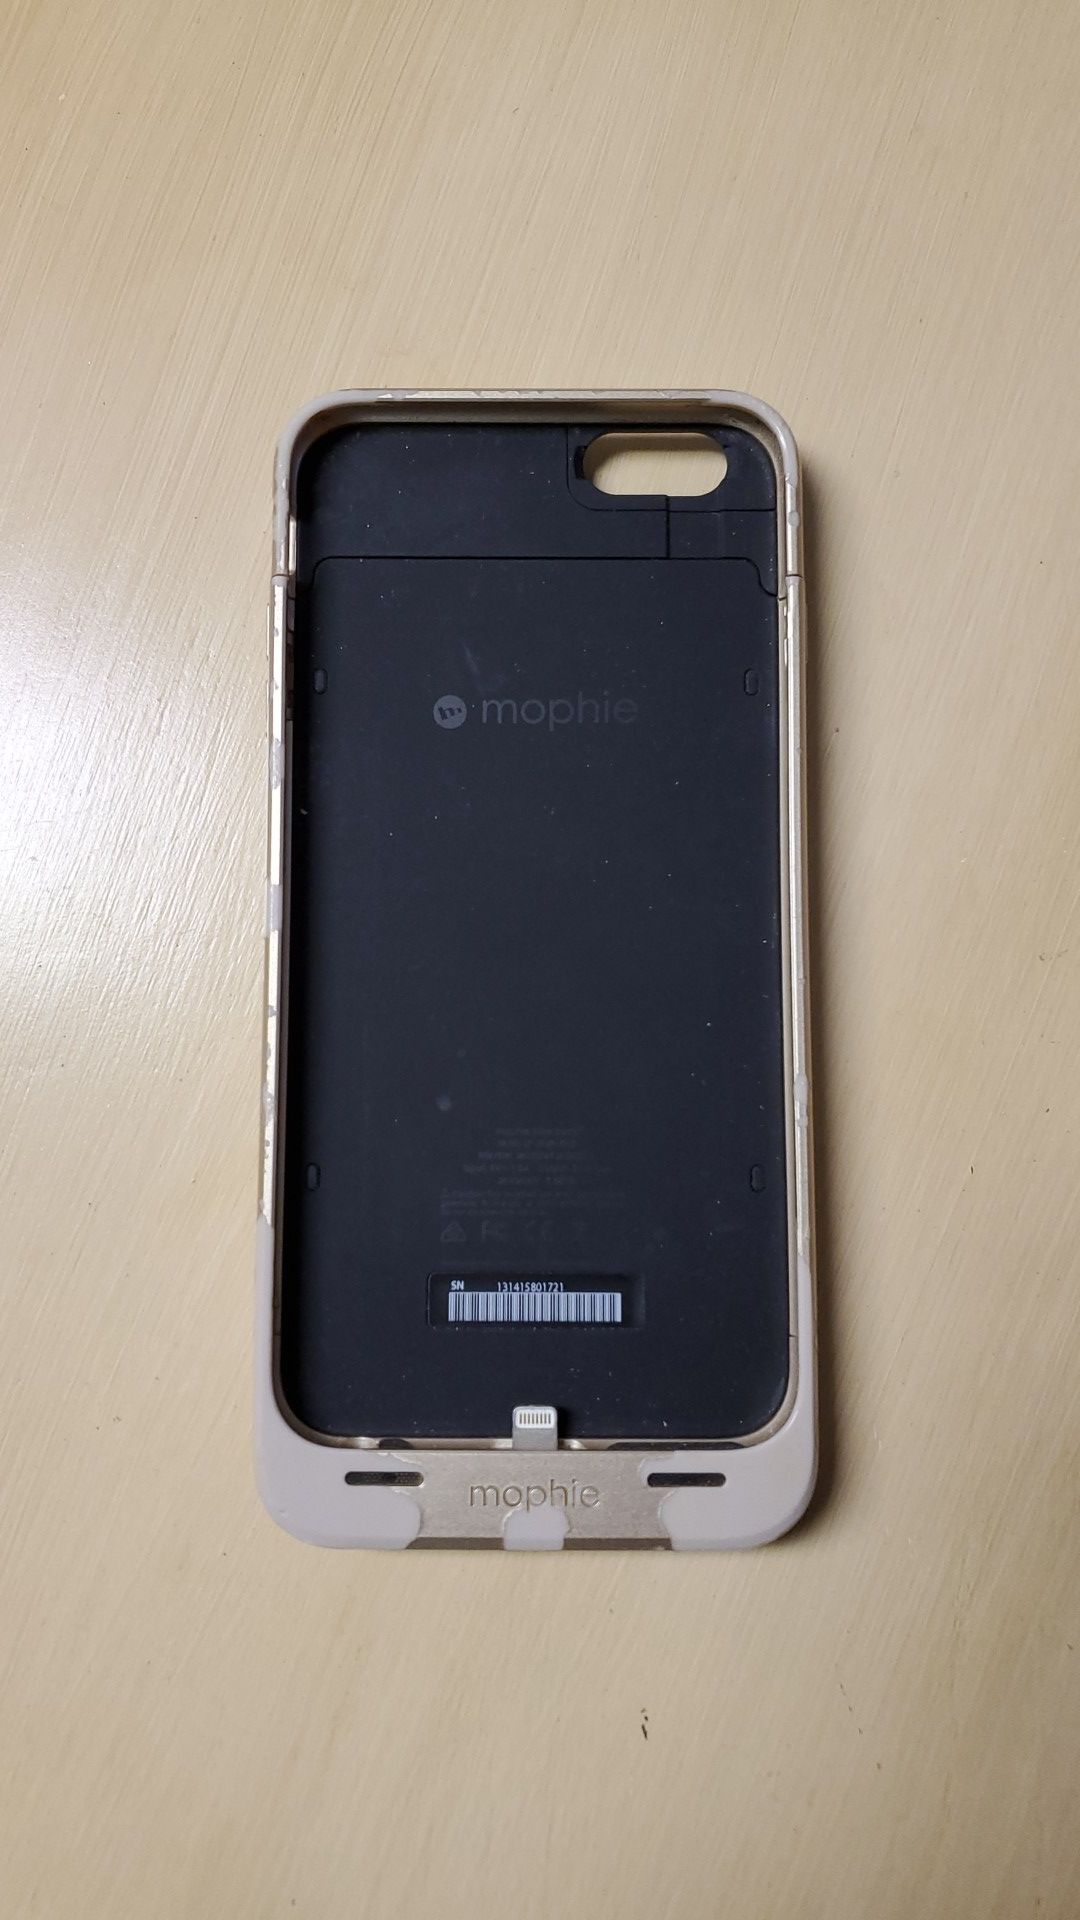 Mophie iPhone 6 Plus case charger